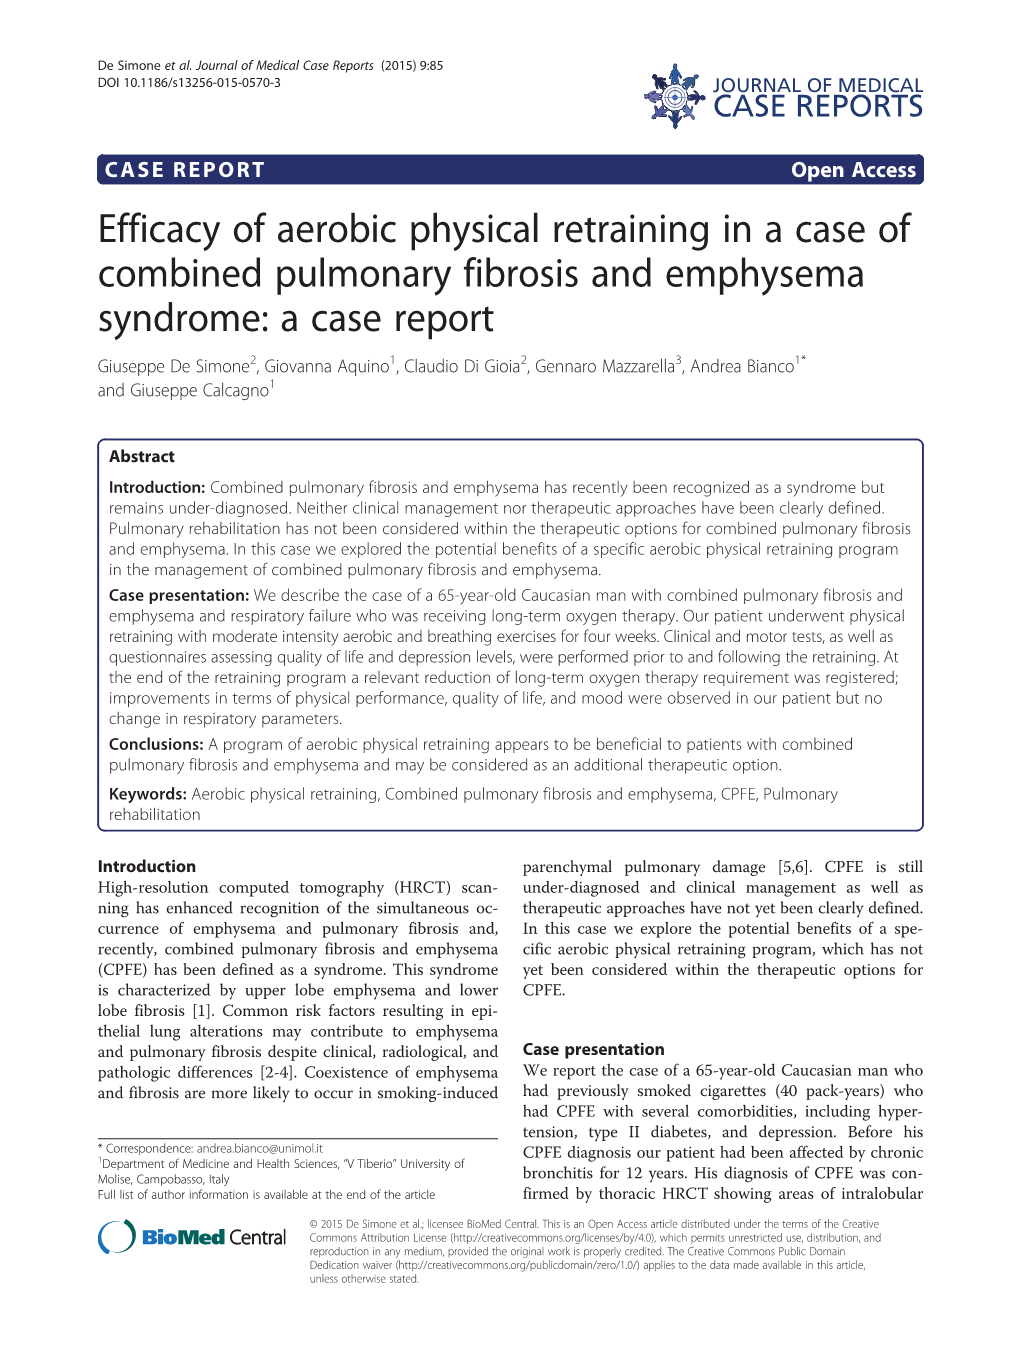 Efficacy of Aerobic Physical Retraining in a Case of Combined Pulmonary